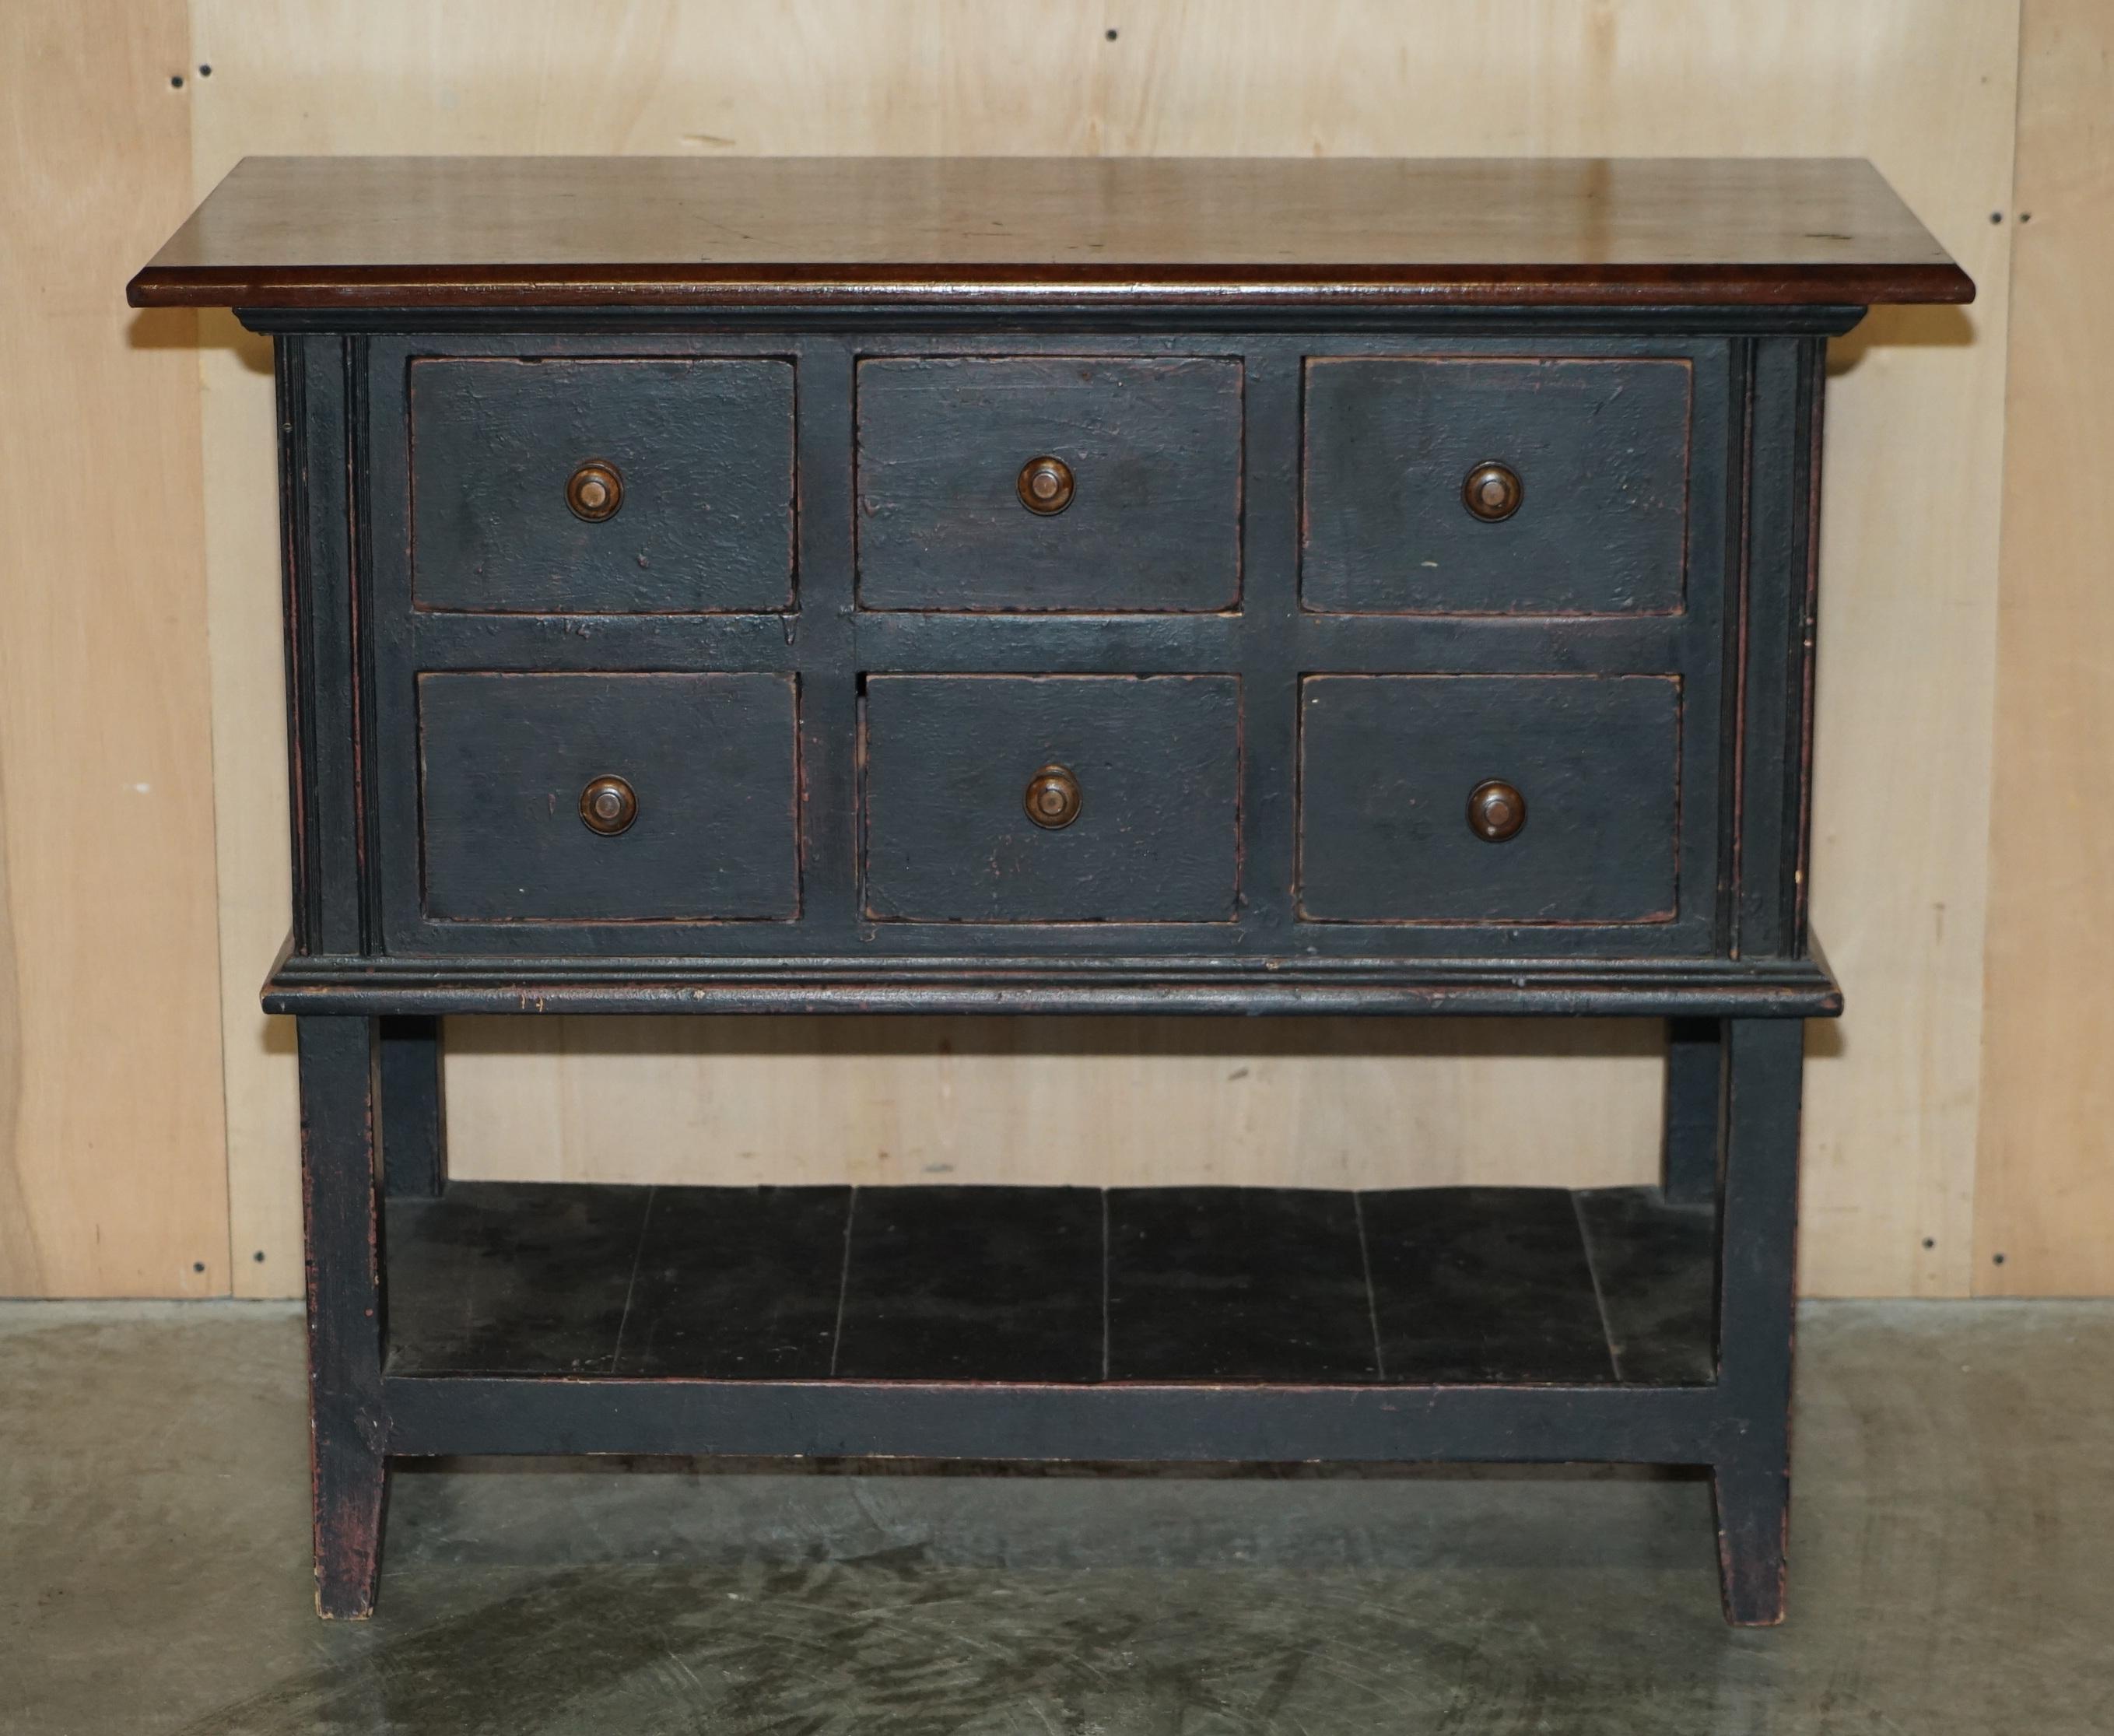 We are delighted to offer for sale this stunning Victorian Apothecary or Haberdashery sideboard with six large drawers and the original French Country hand painted finish.

This is a very good looking and well made piece. It's a good height and